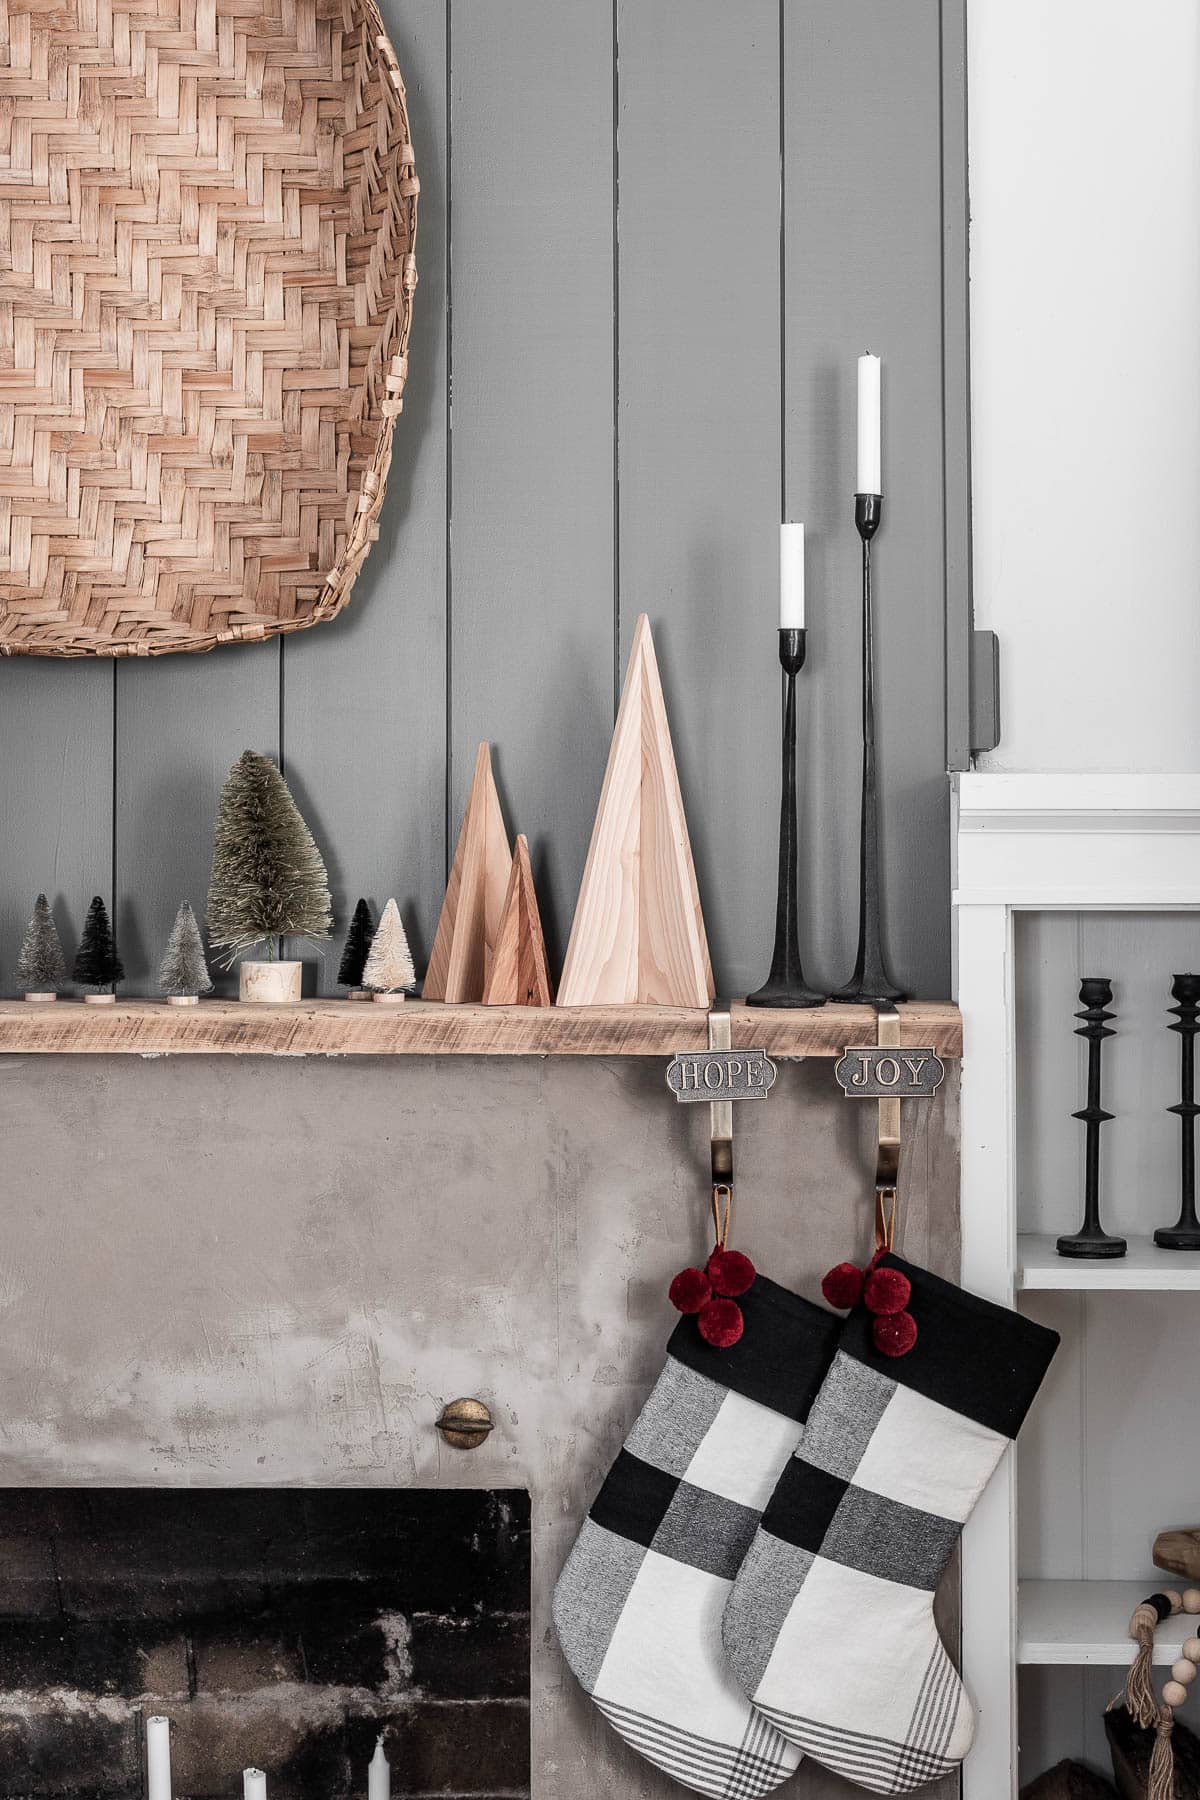 Scandinavian style minimalist Christmas mantel decor ideas with wooden trees, plaid stockings, and a basket hung above